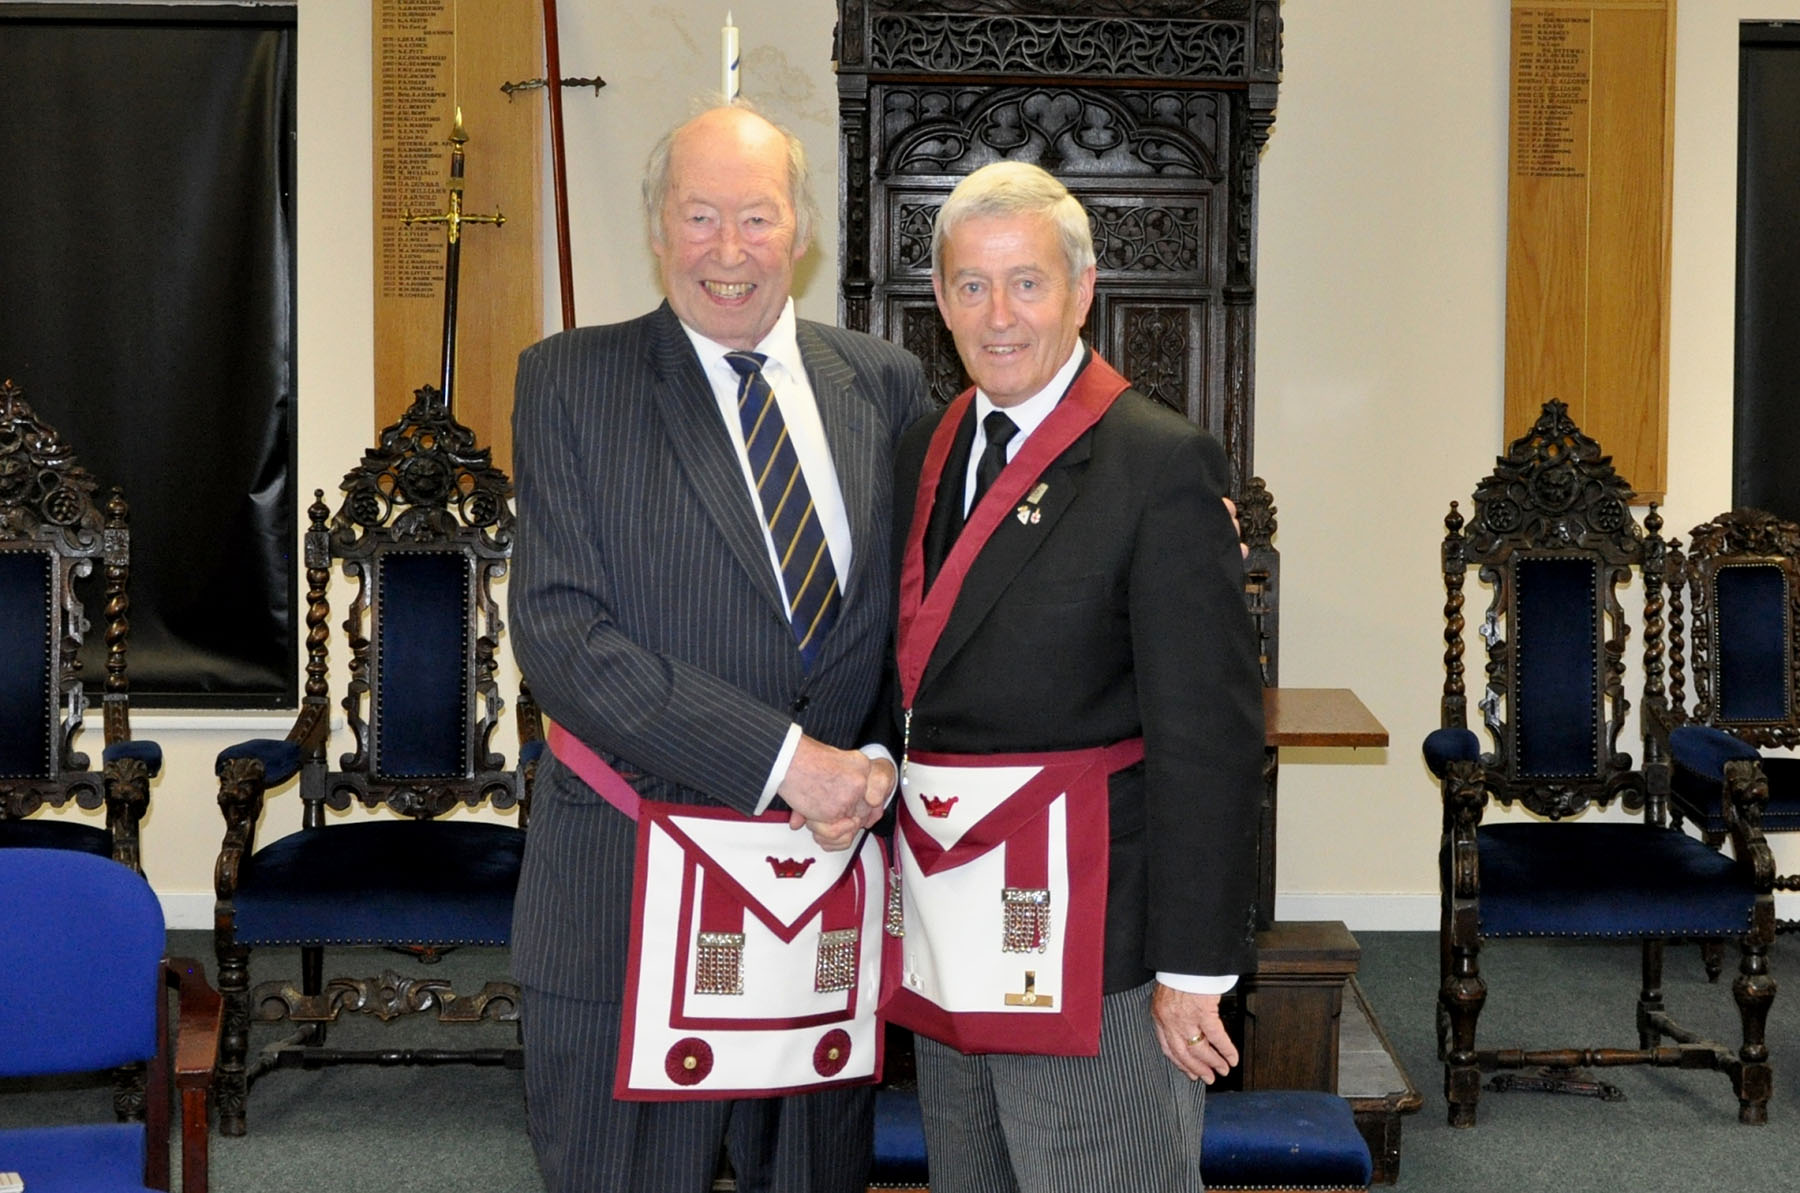 Official Visit by the Deputy Provincial Grand Master to Archbishop Æthelhelm Court